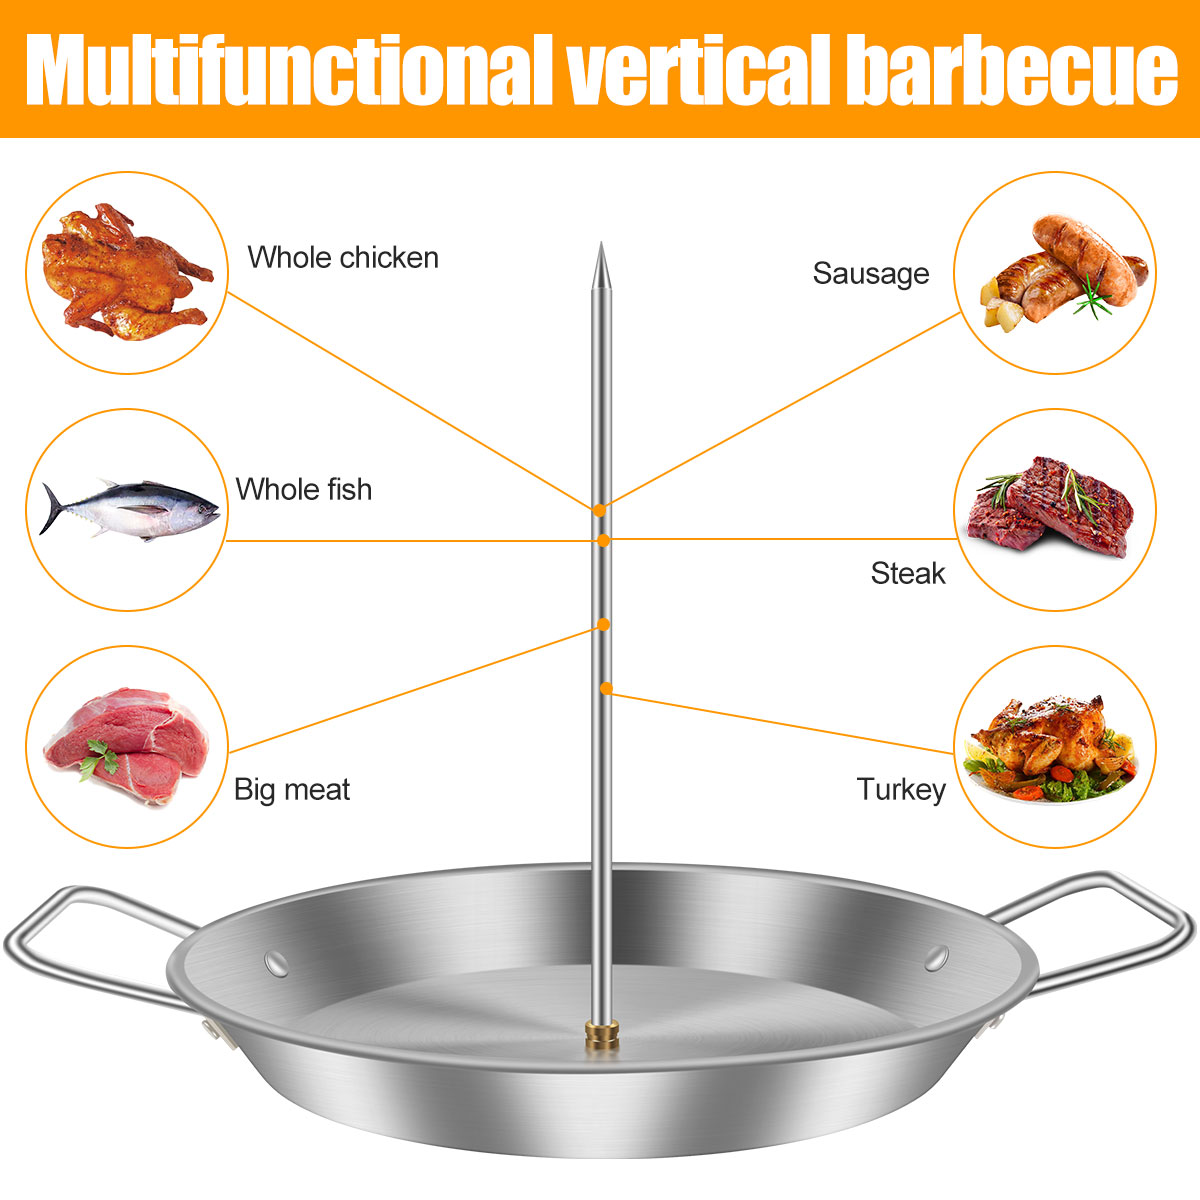 Lieonvis Vertical Meat Skewer Stainless Steel BBQ Vertical Skewer Grill with 3 Replacement Spikes Barbecue Vertical Skewer Grill Rack Stand with Handle for Whole Chicken Fish Sausage Steak - image 4 of 10